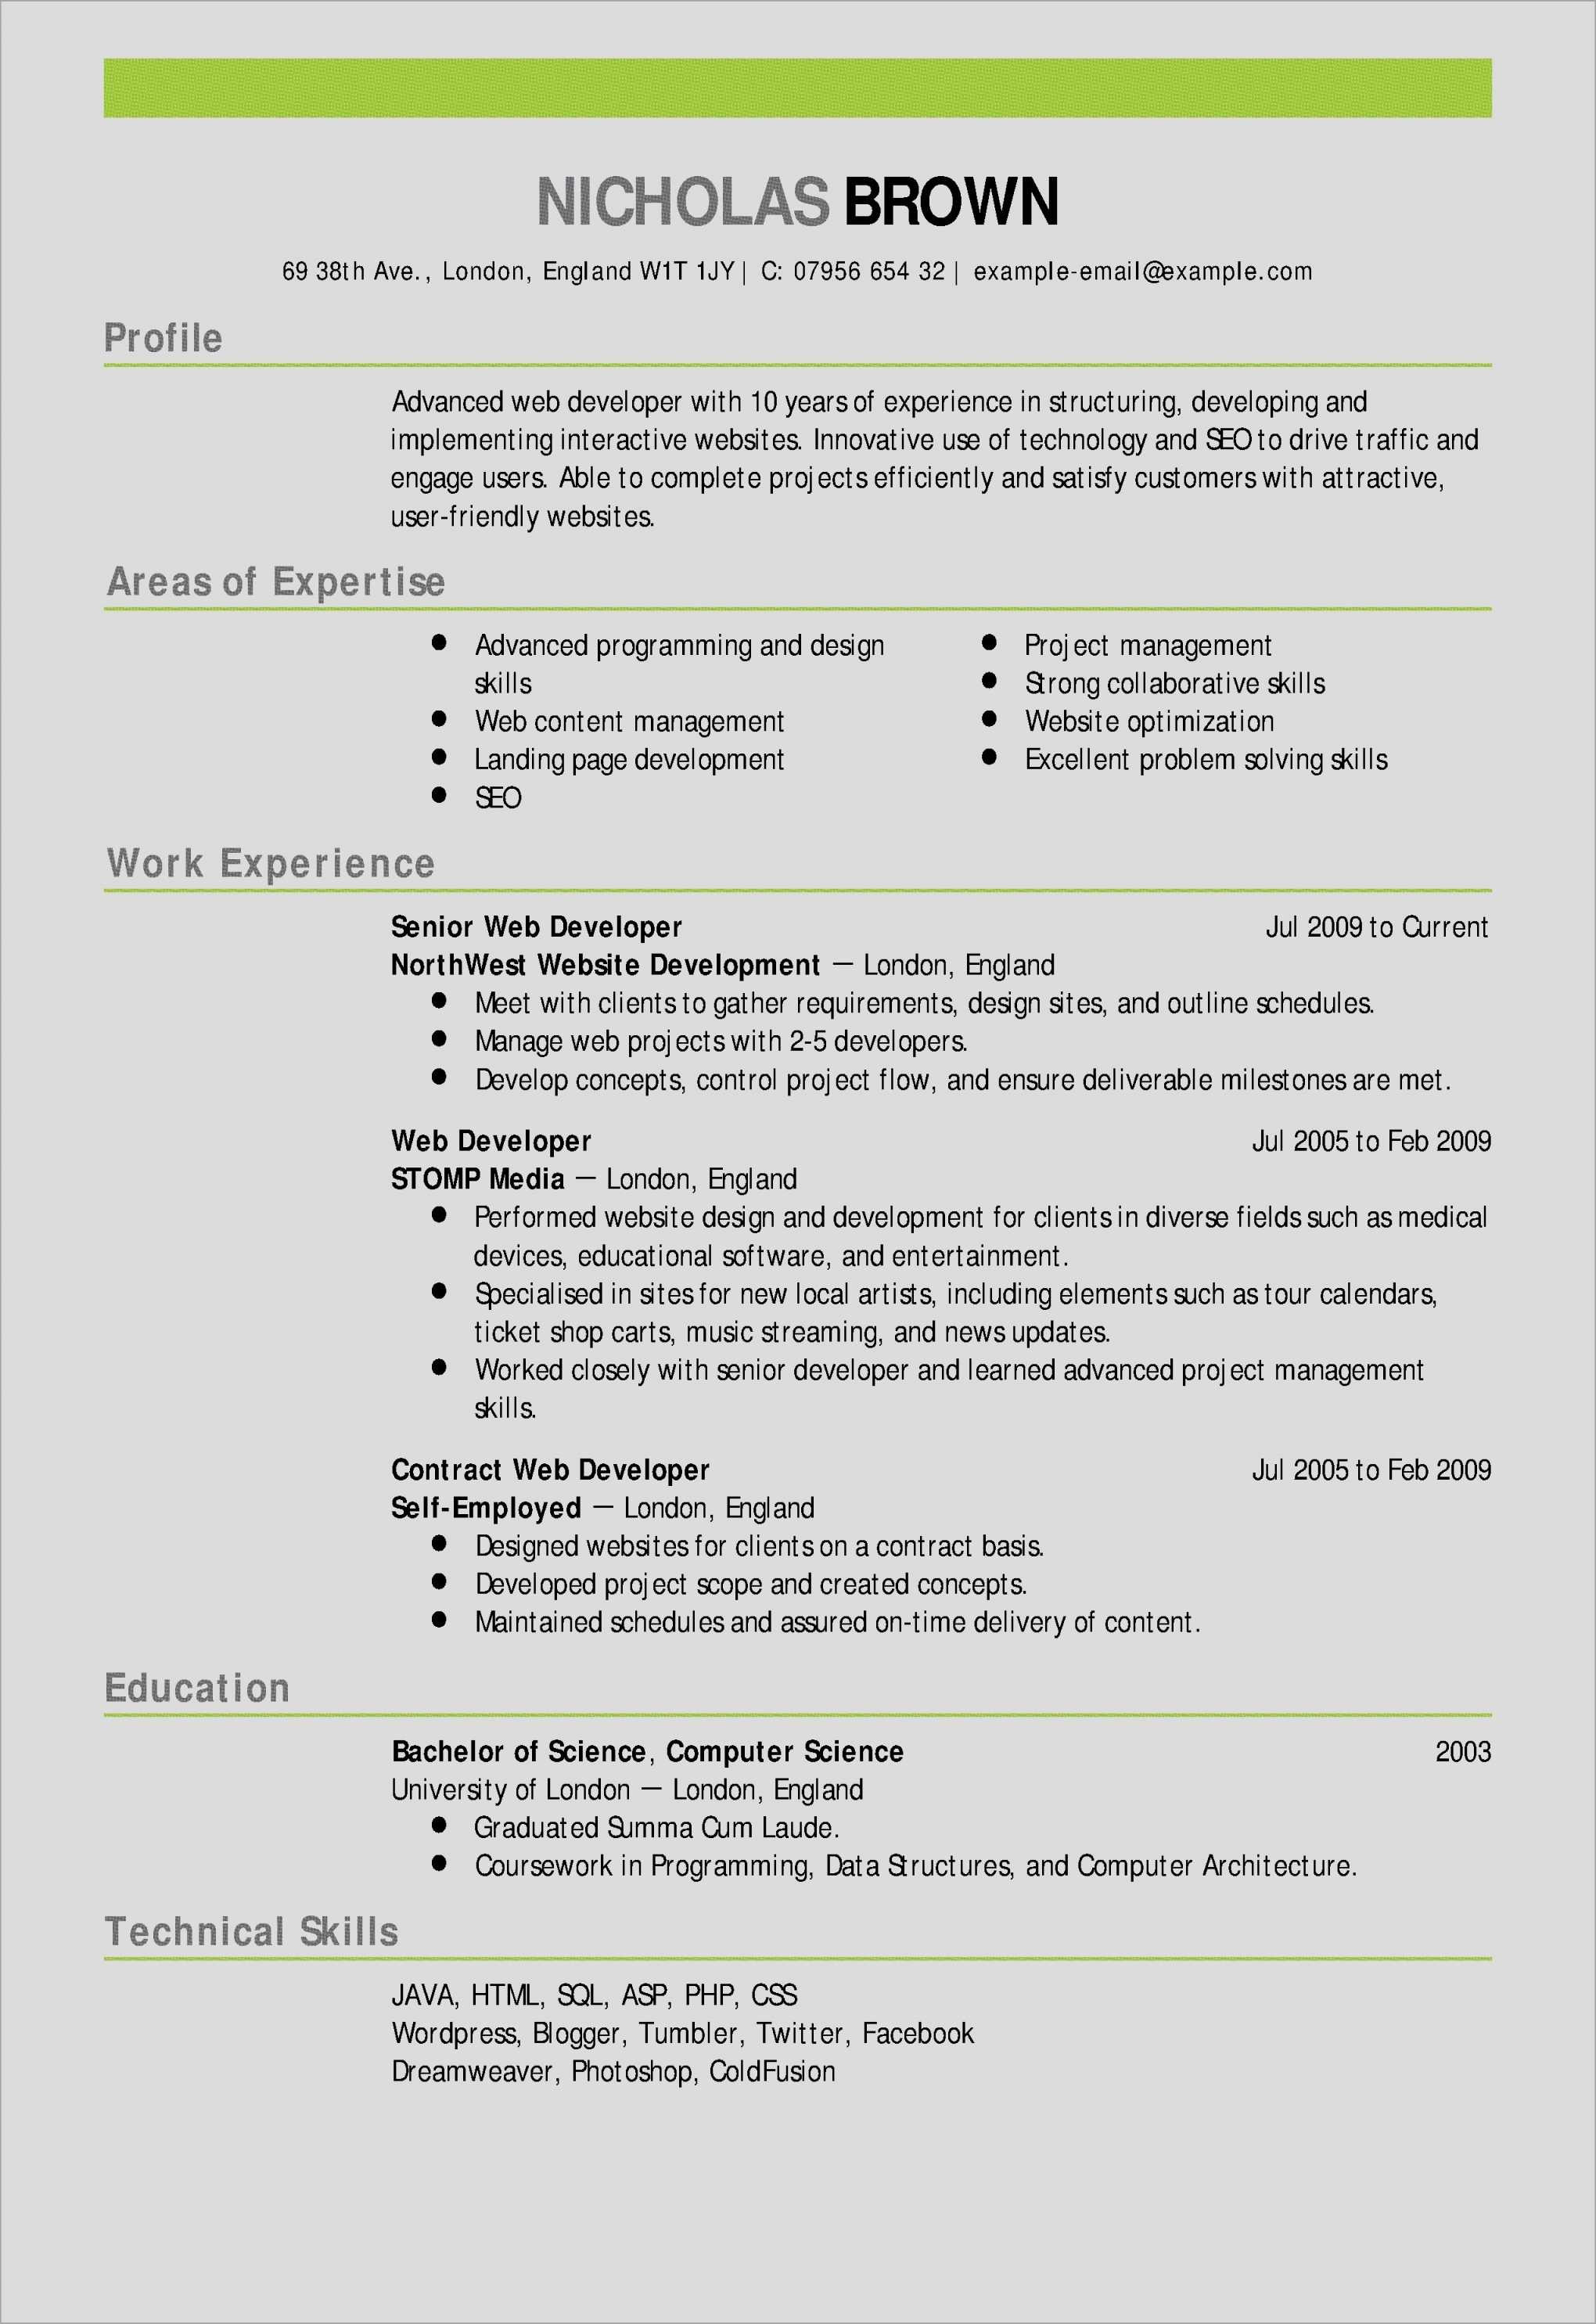 Resume Template Libreoffice Resume Word New Awesome Examples Resumes